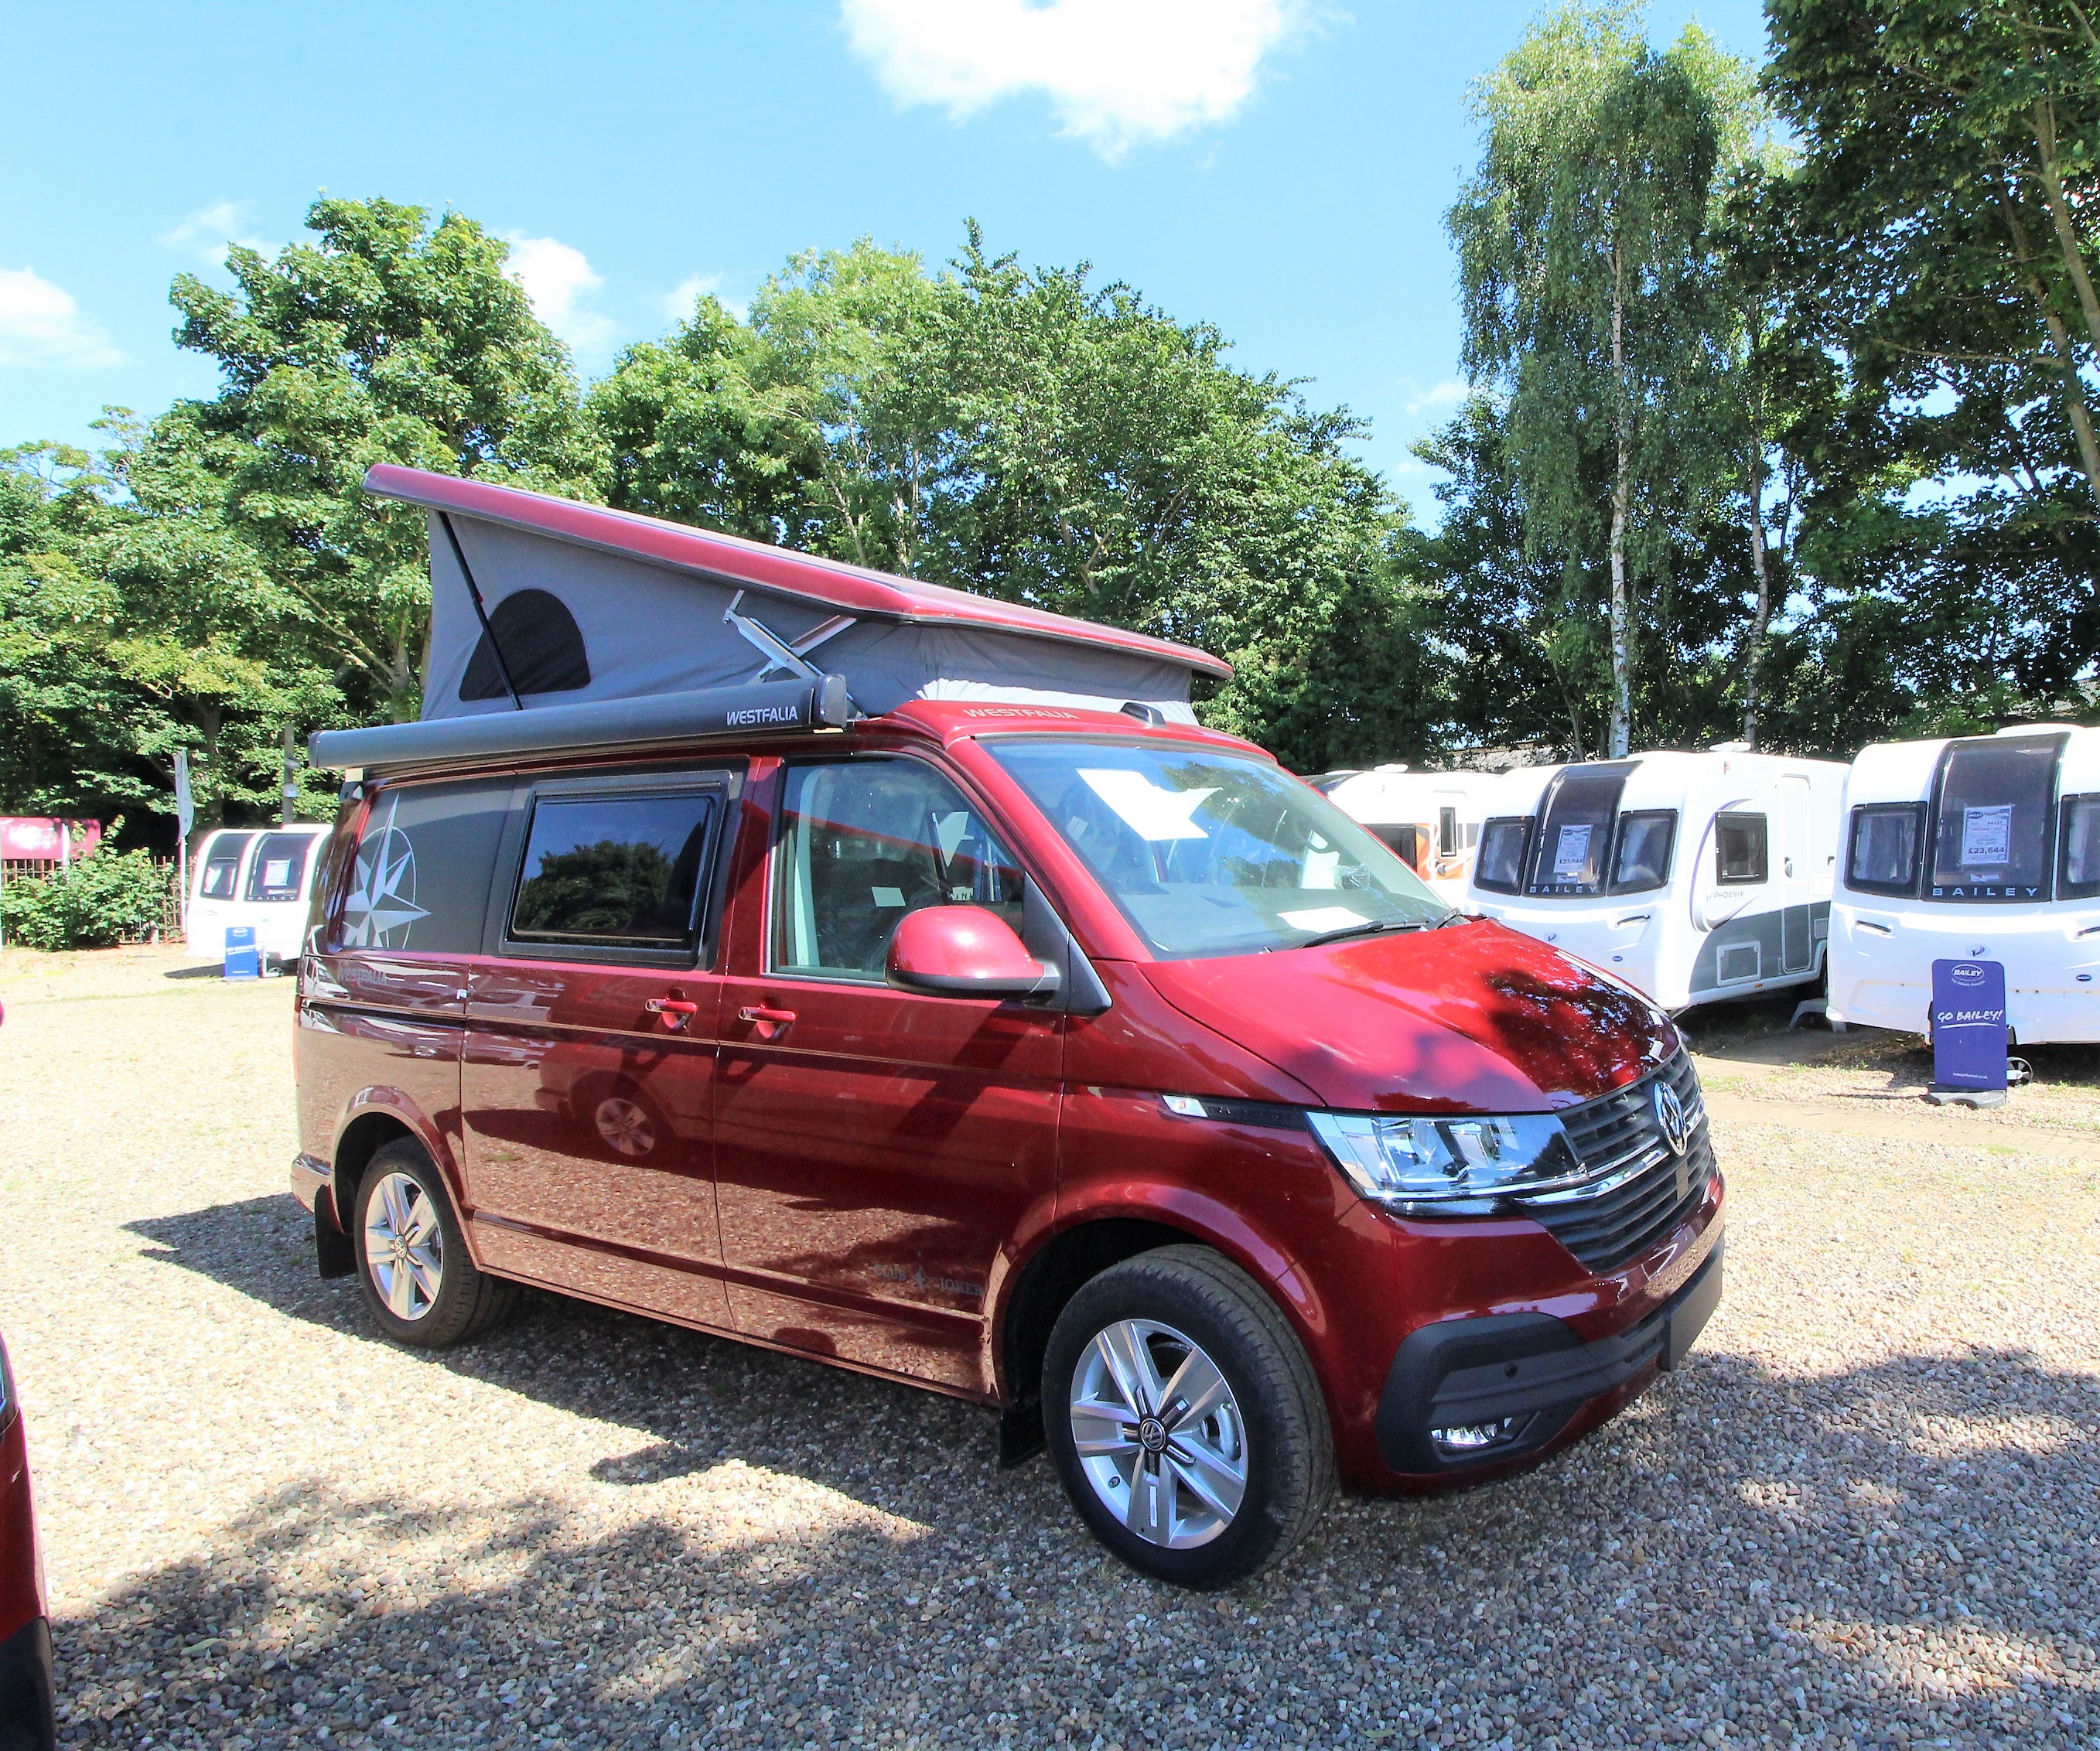 Discover Innovation In Our Campervans This Season…